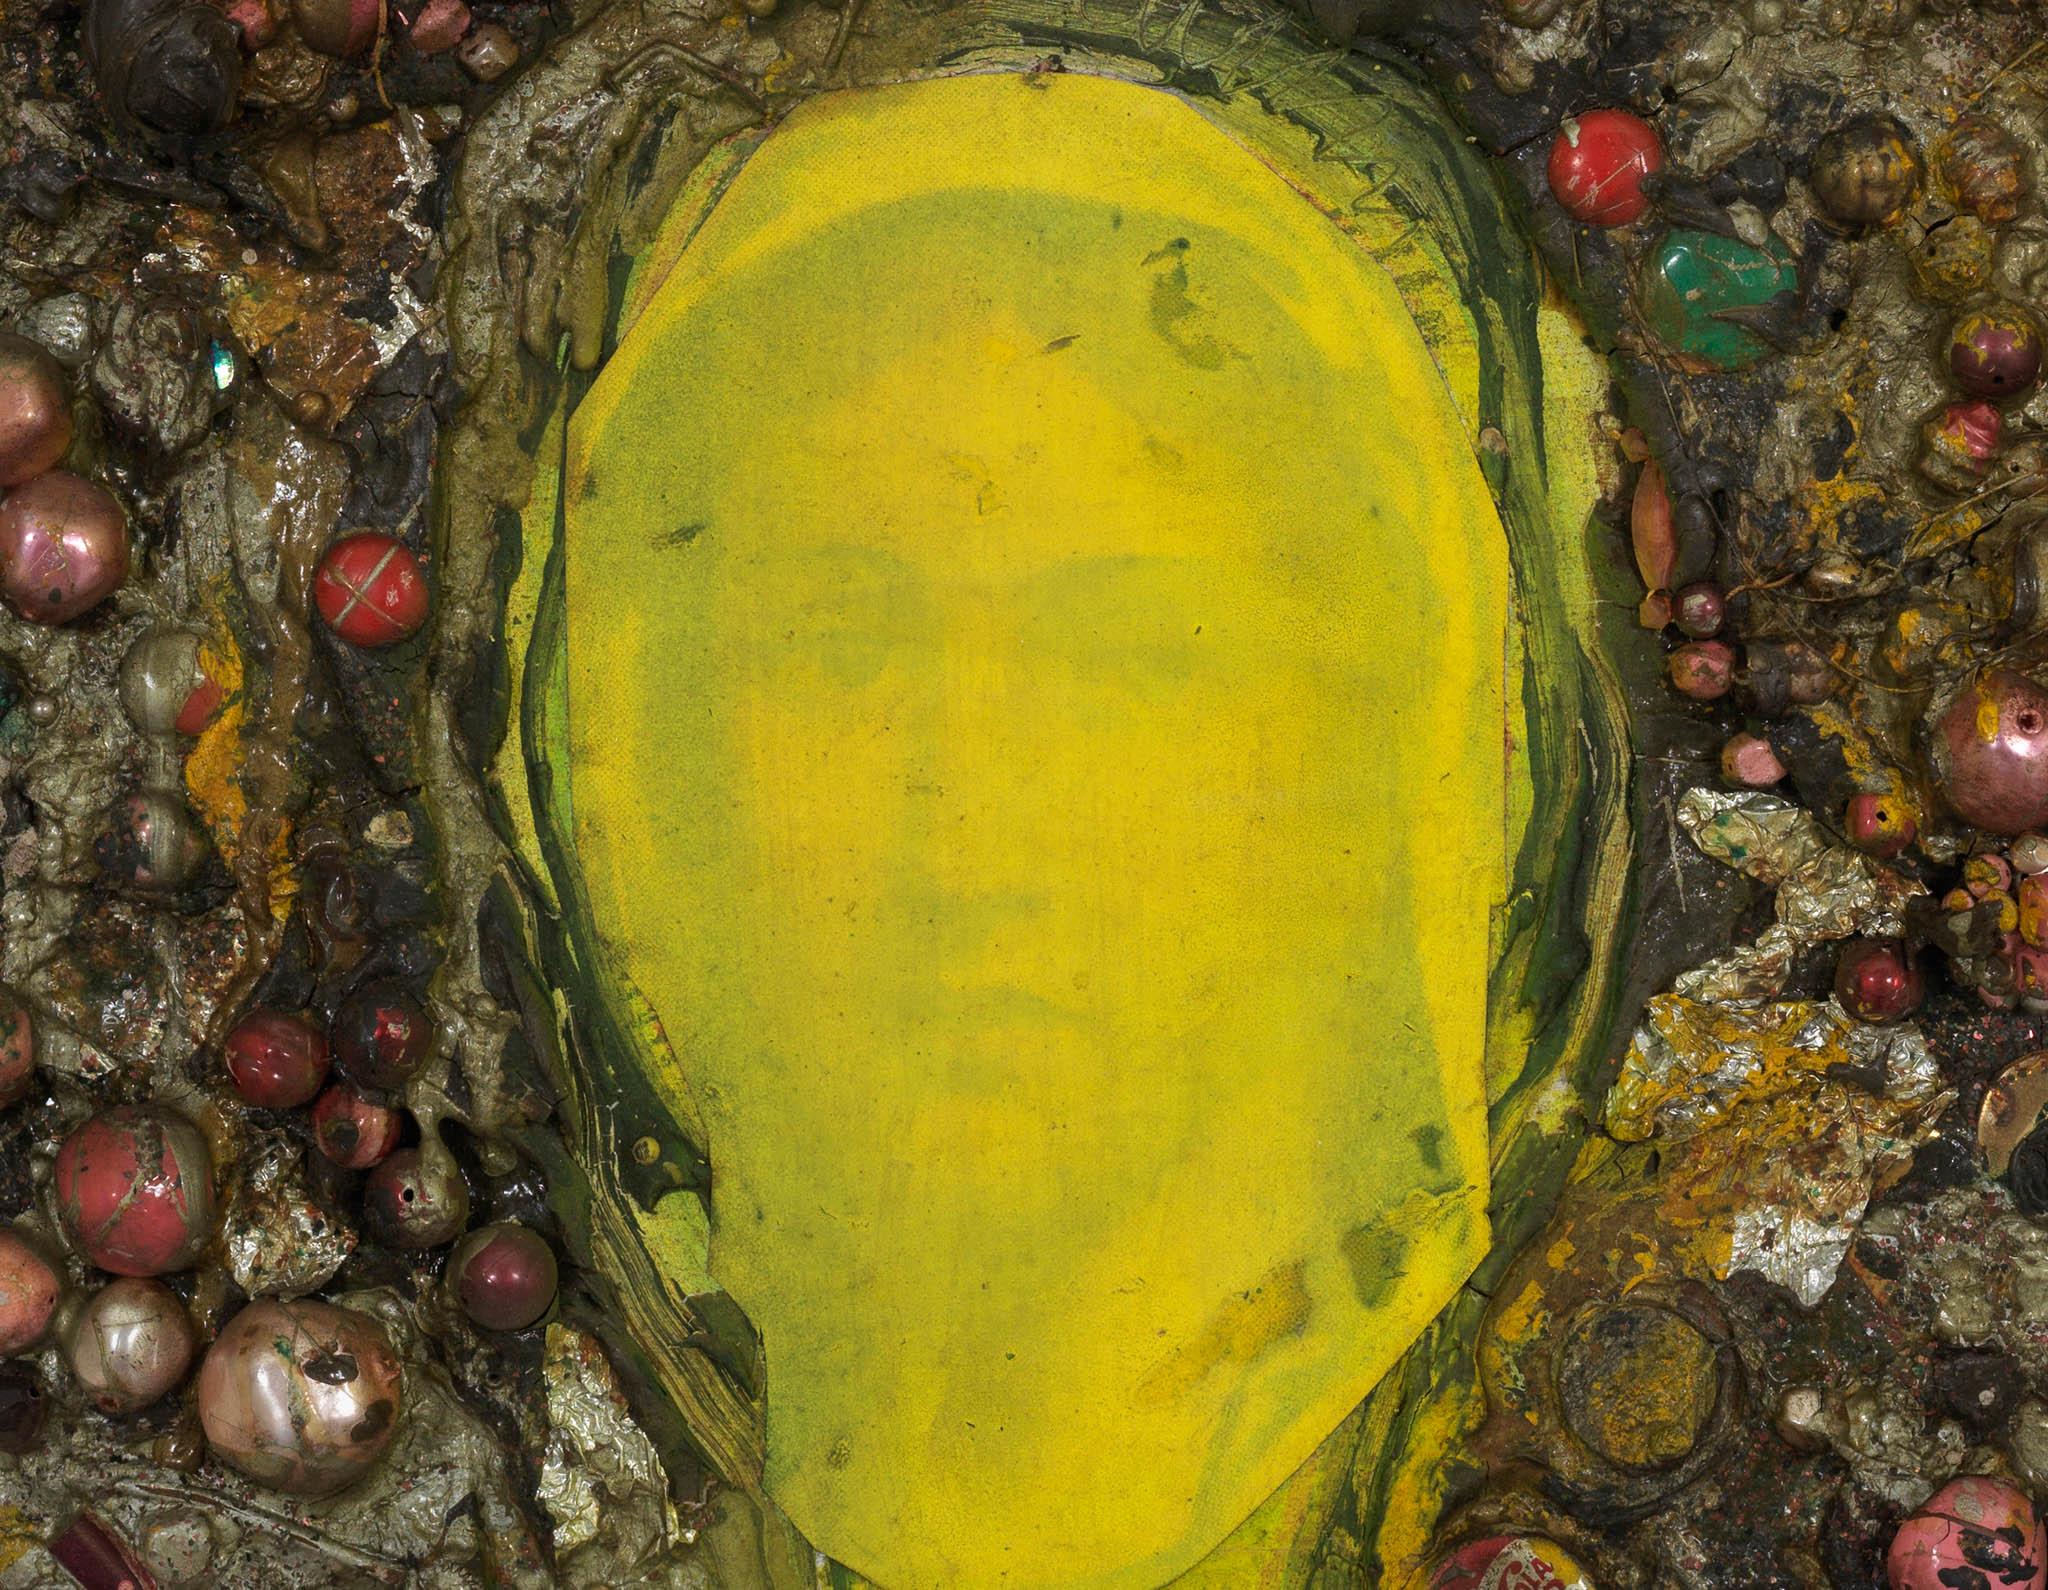 a mixed media collage in a circle with a yellow obscured figure in the center